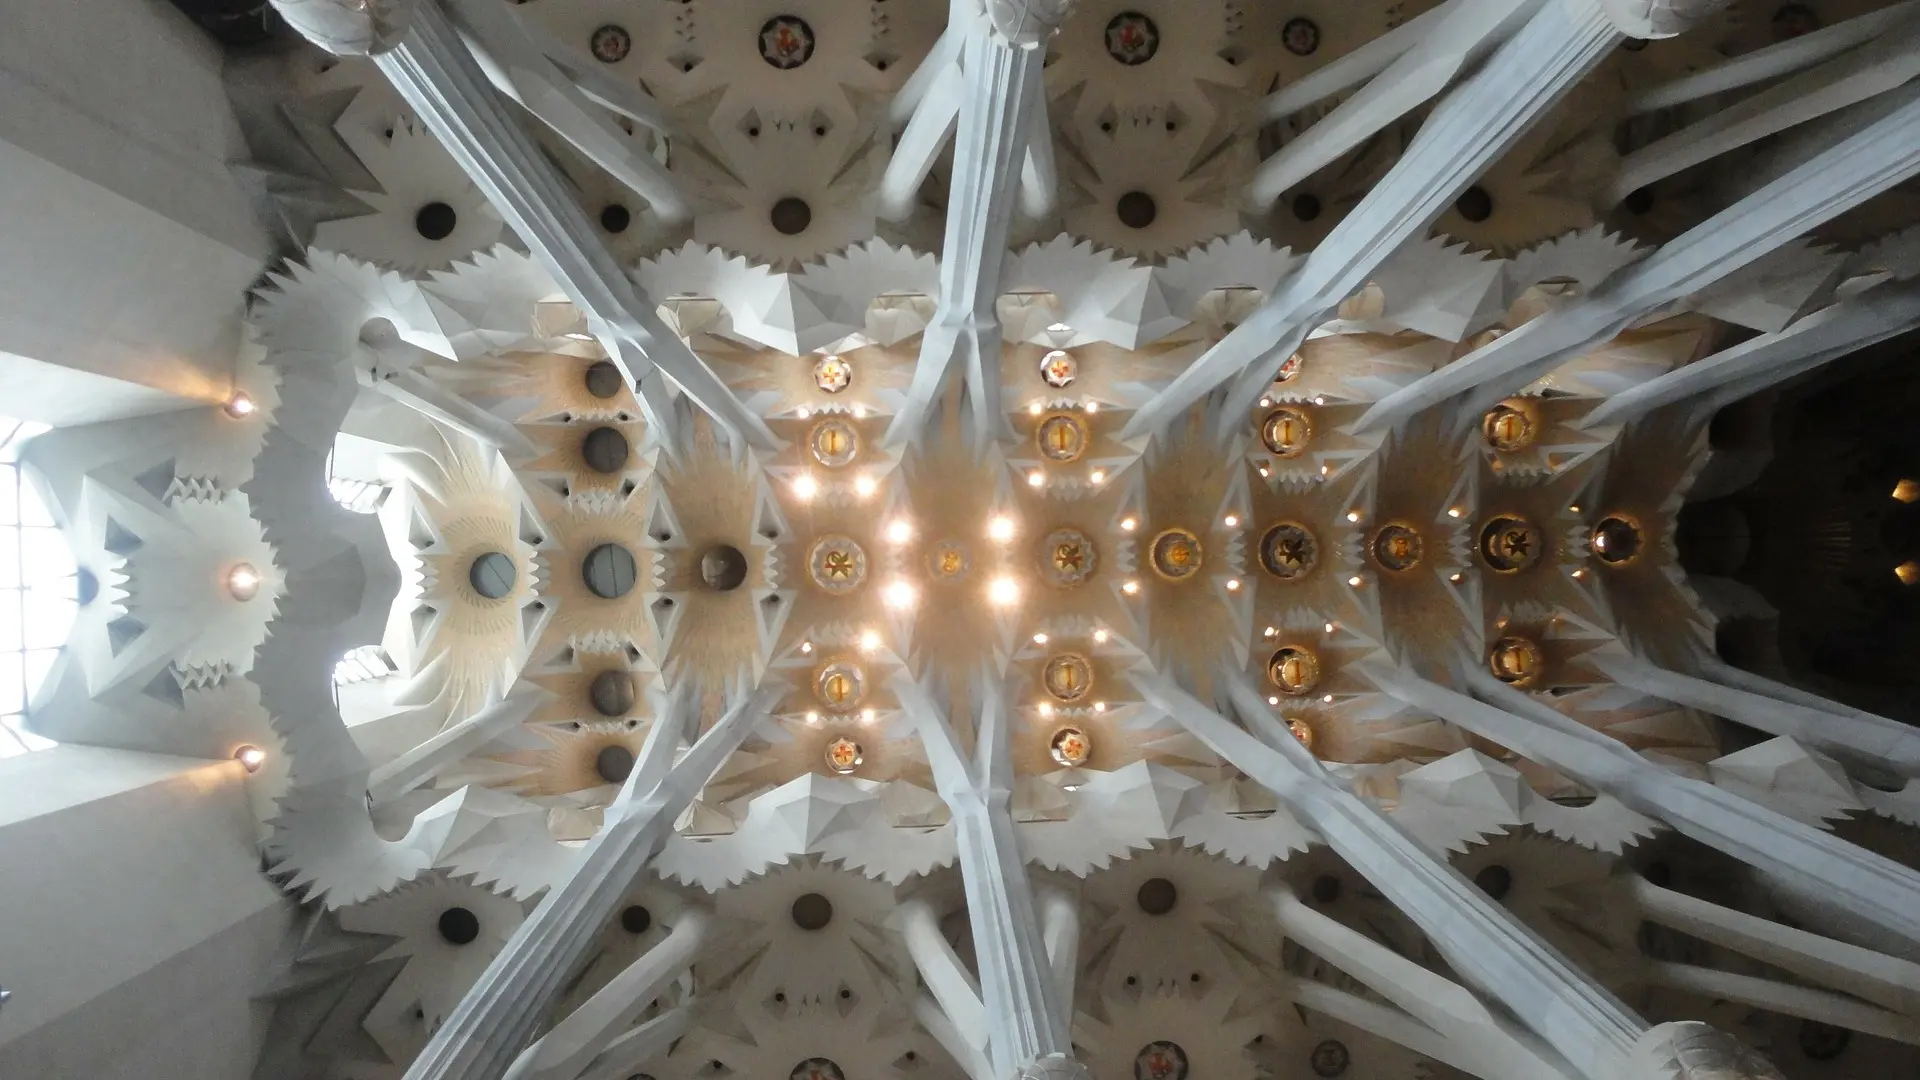 Built "tree branches" of the ceiling in the Sagrada Familia.